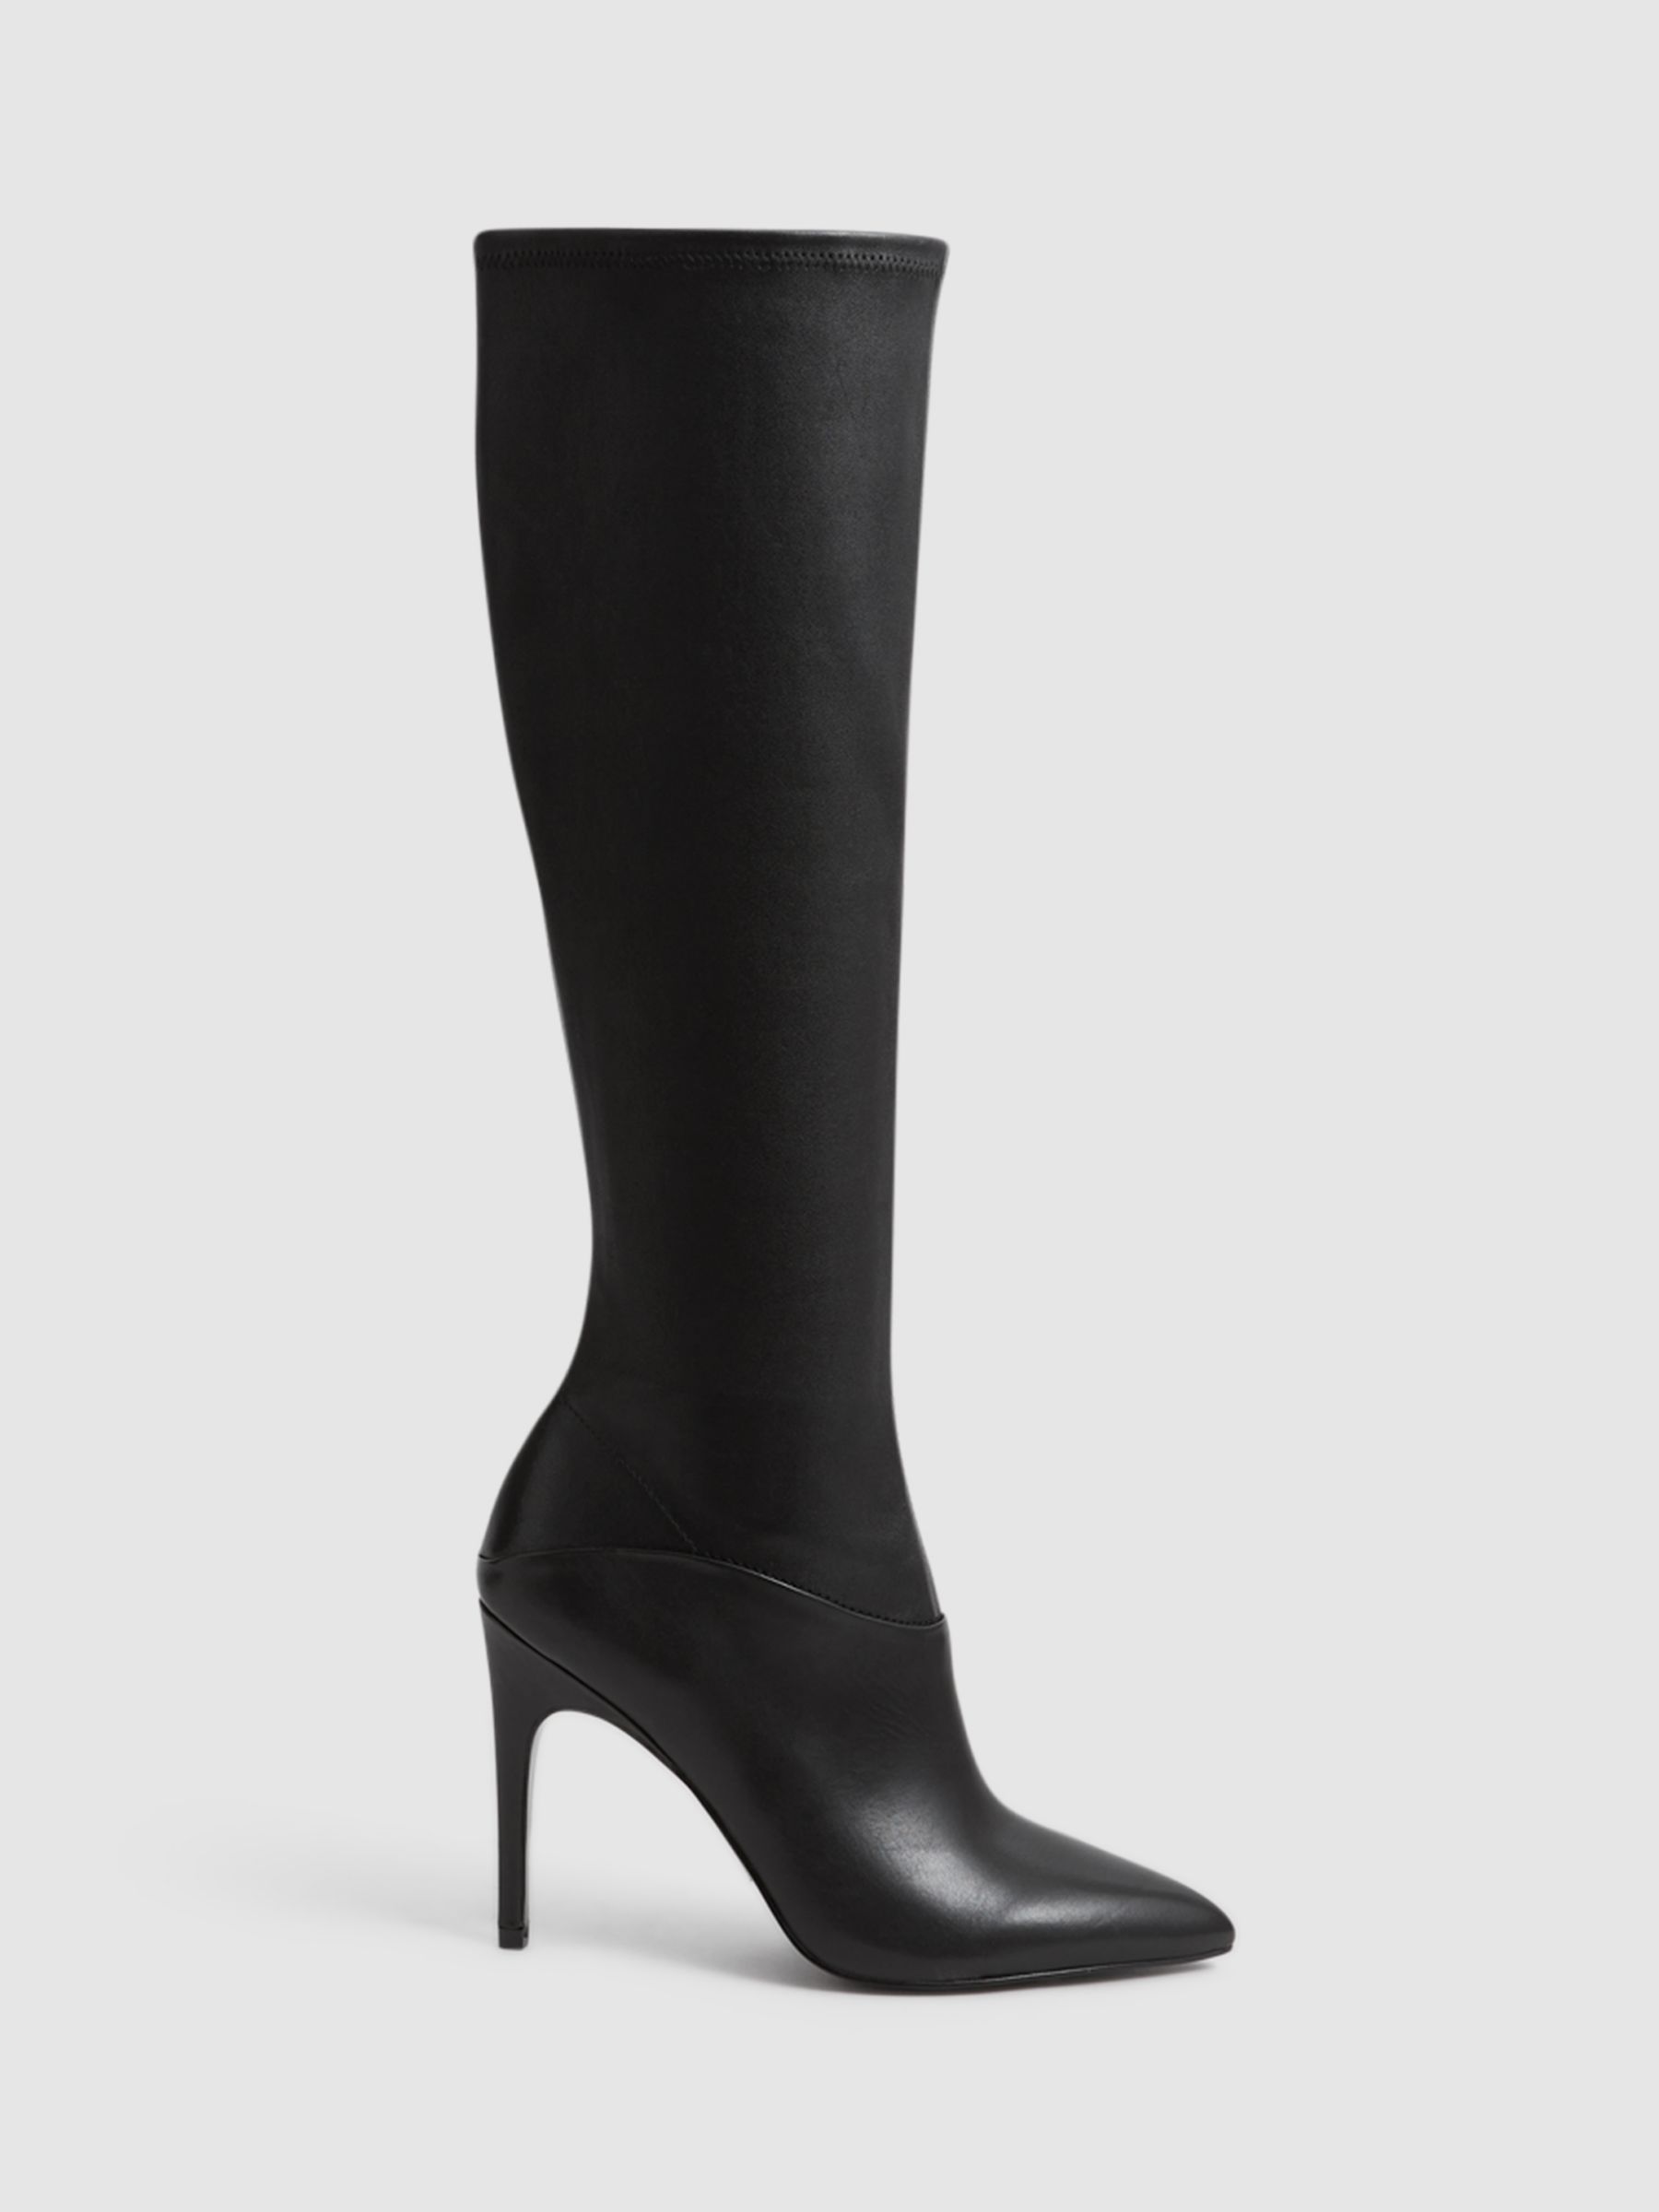 Reiss Carina Leather Stretch Knee High Boots, Black at John Lewis ...